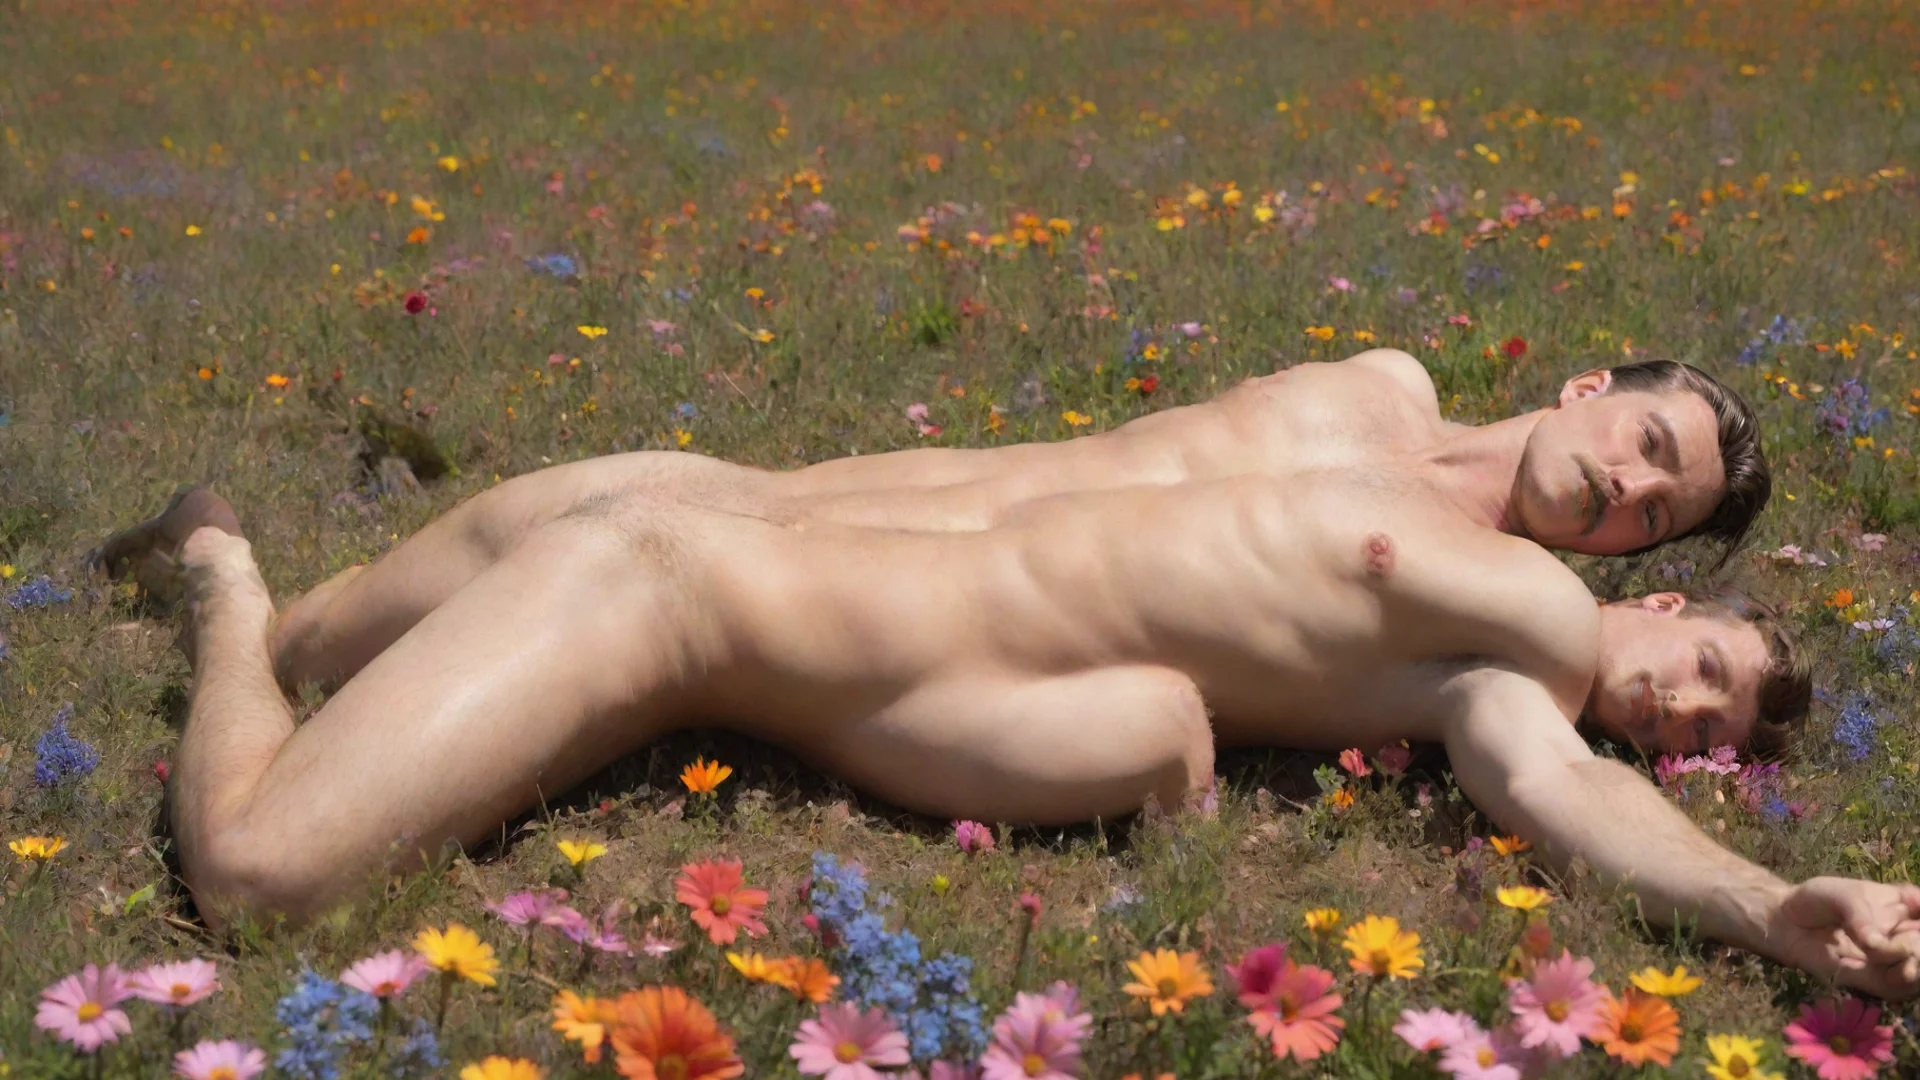 artstation art shirtless man lying floor in colorful meadow tom of finland style confident engaging wow 3 wide